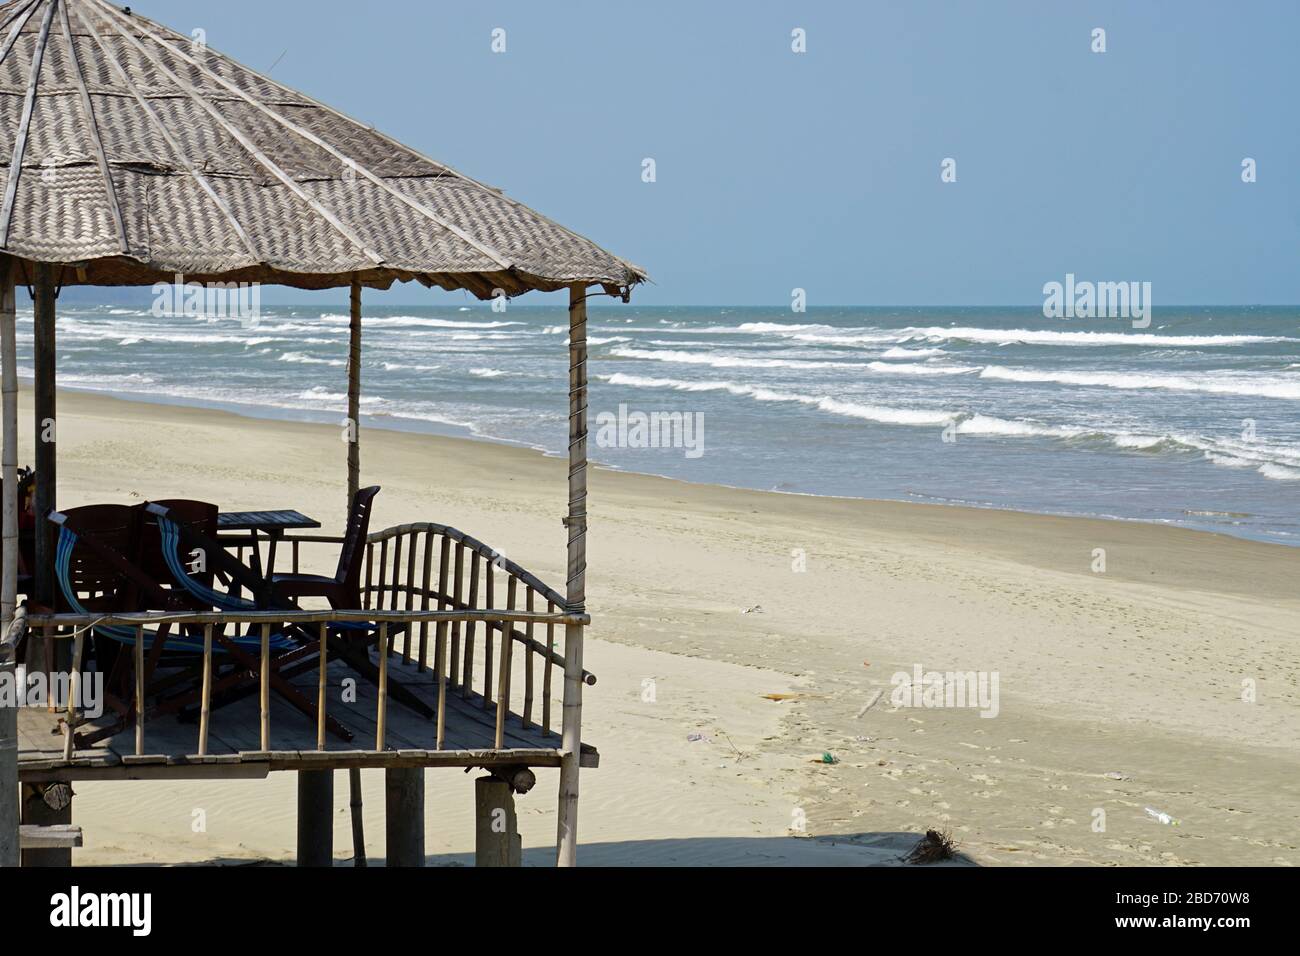 wooden beach hut on a lonely naturl beach Stock Photo